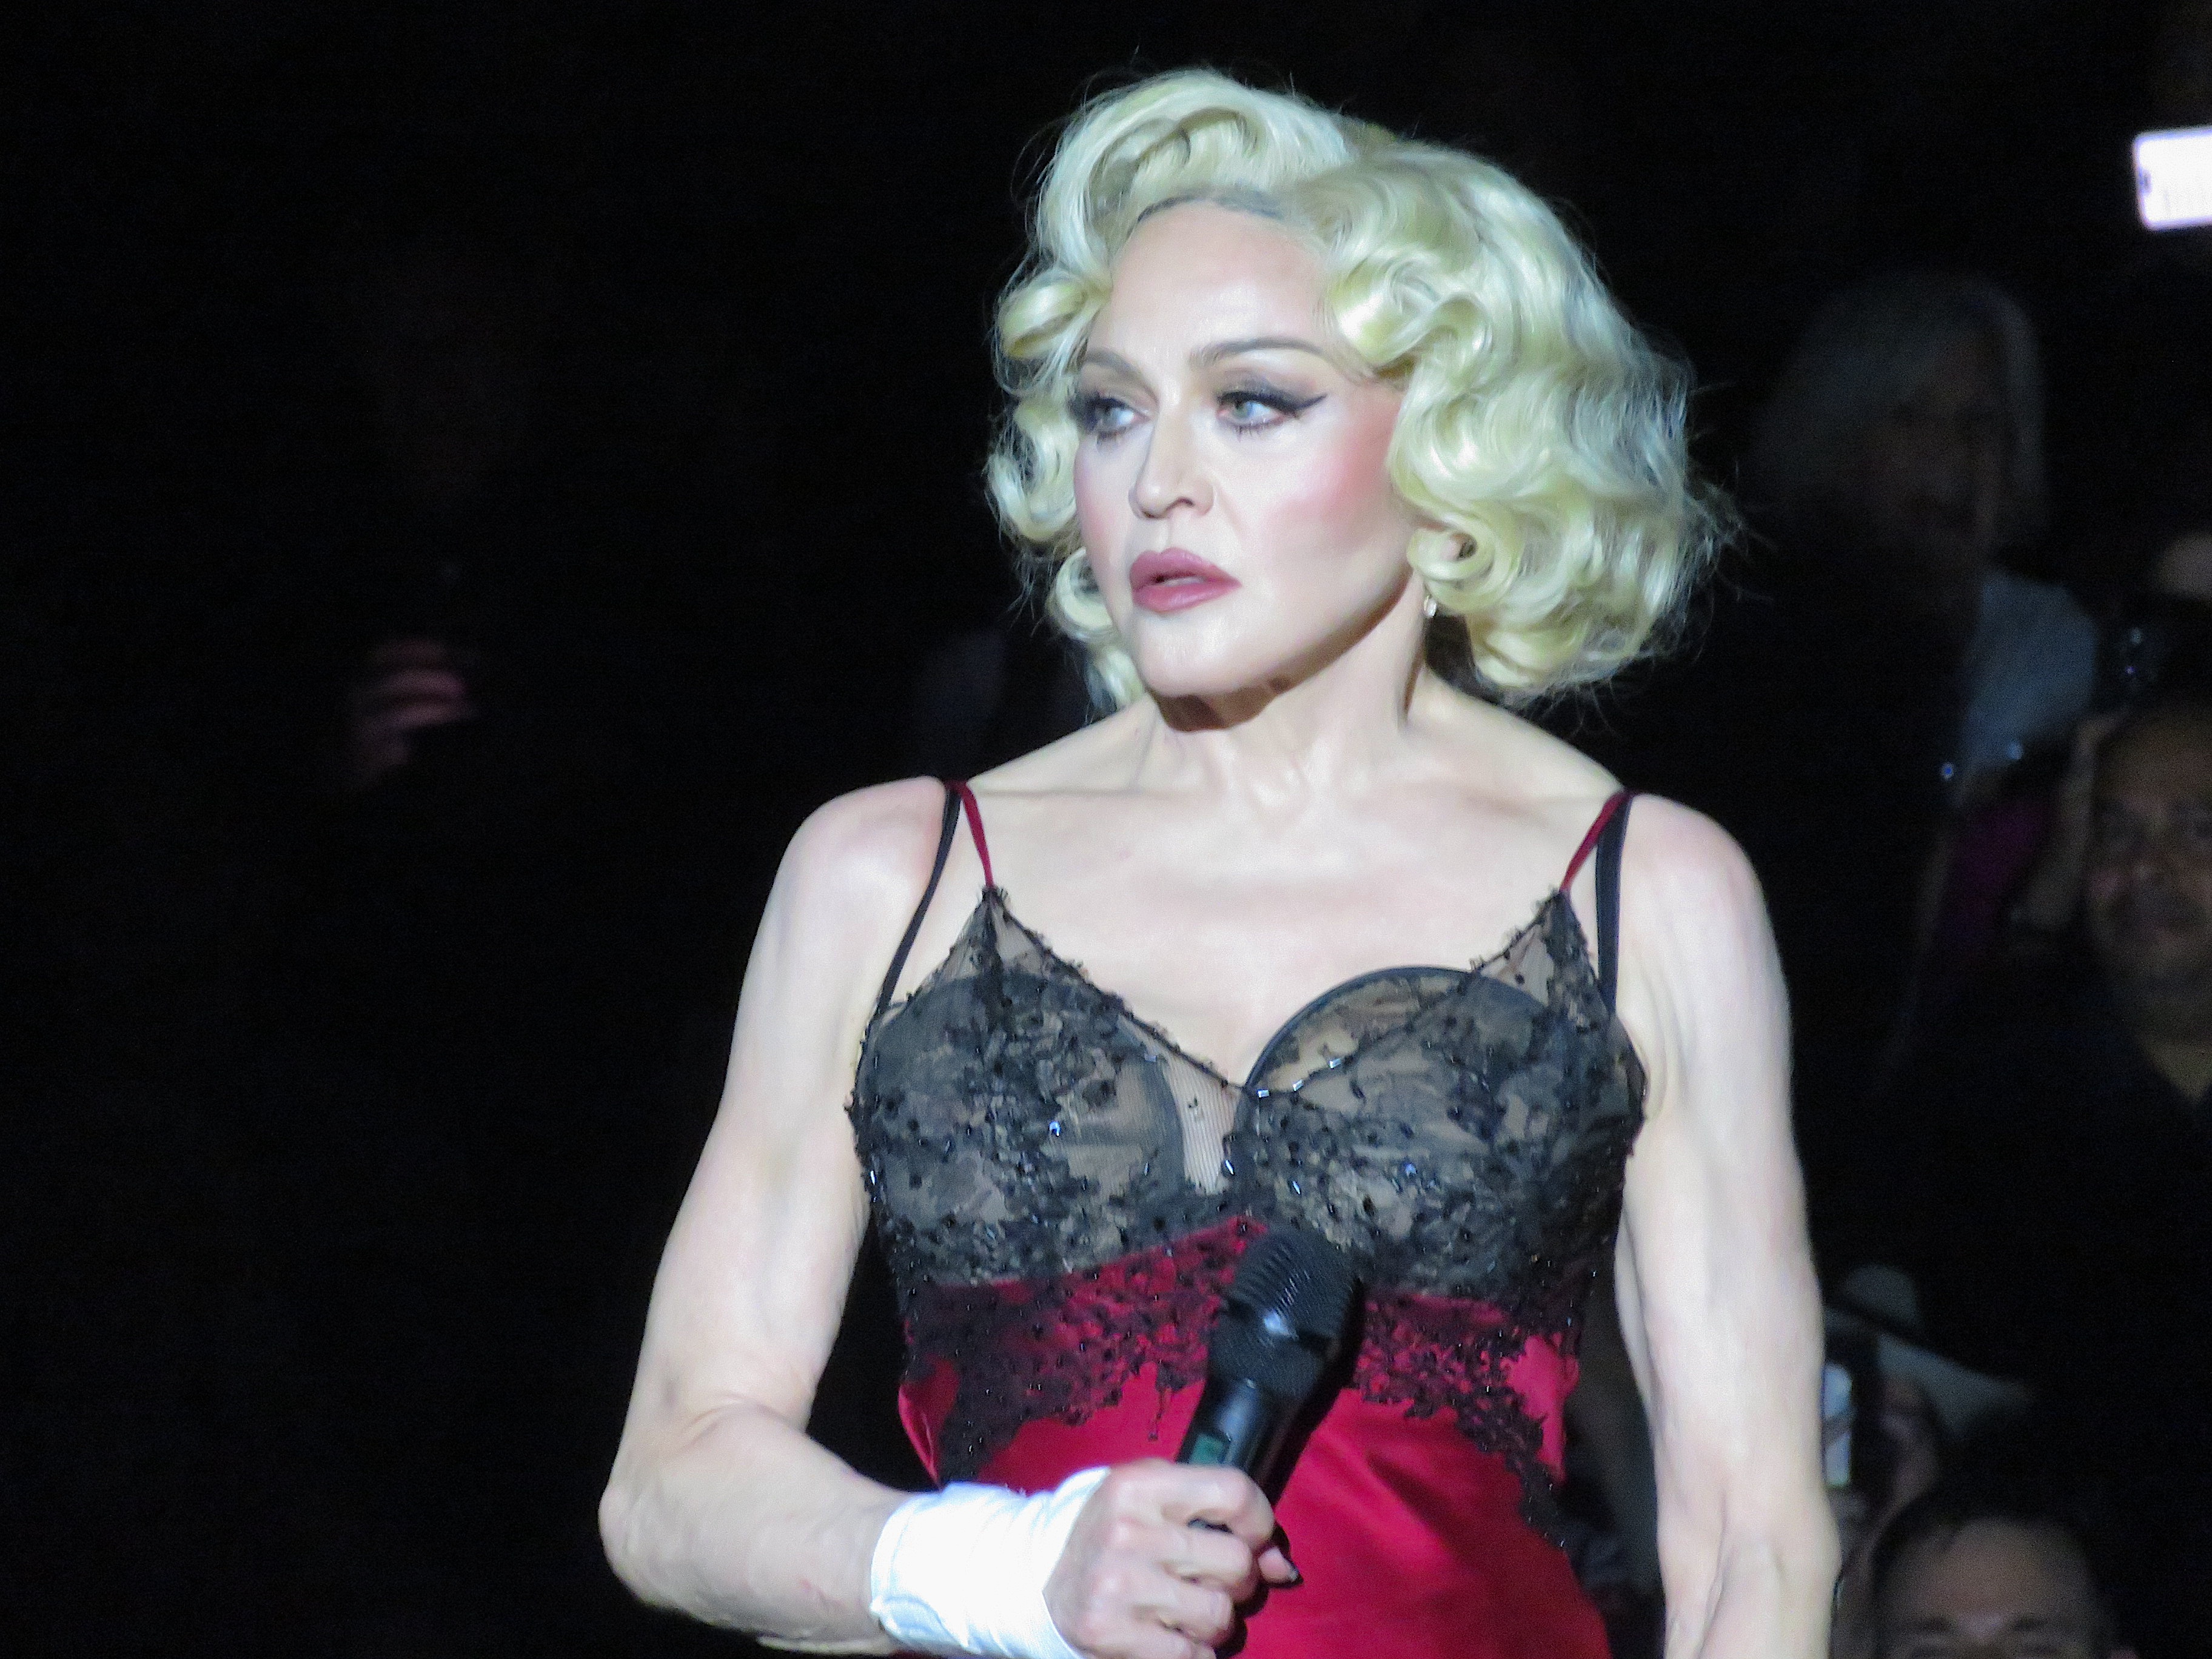 One of Madonna's close associates has pleaded with fans to go easy on her after she was reportedly late for gigs